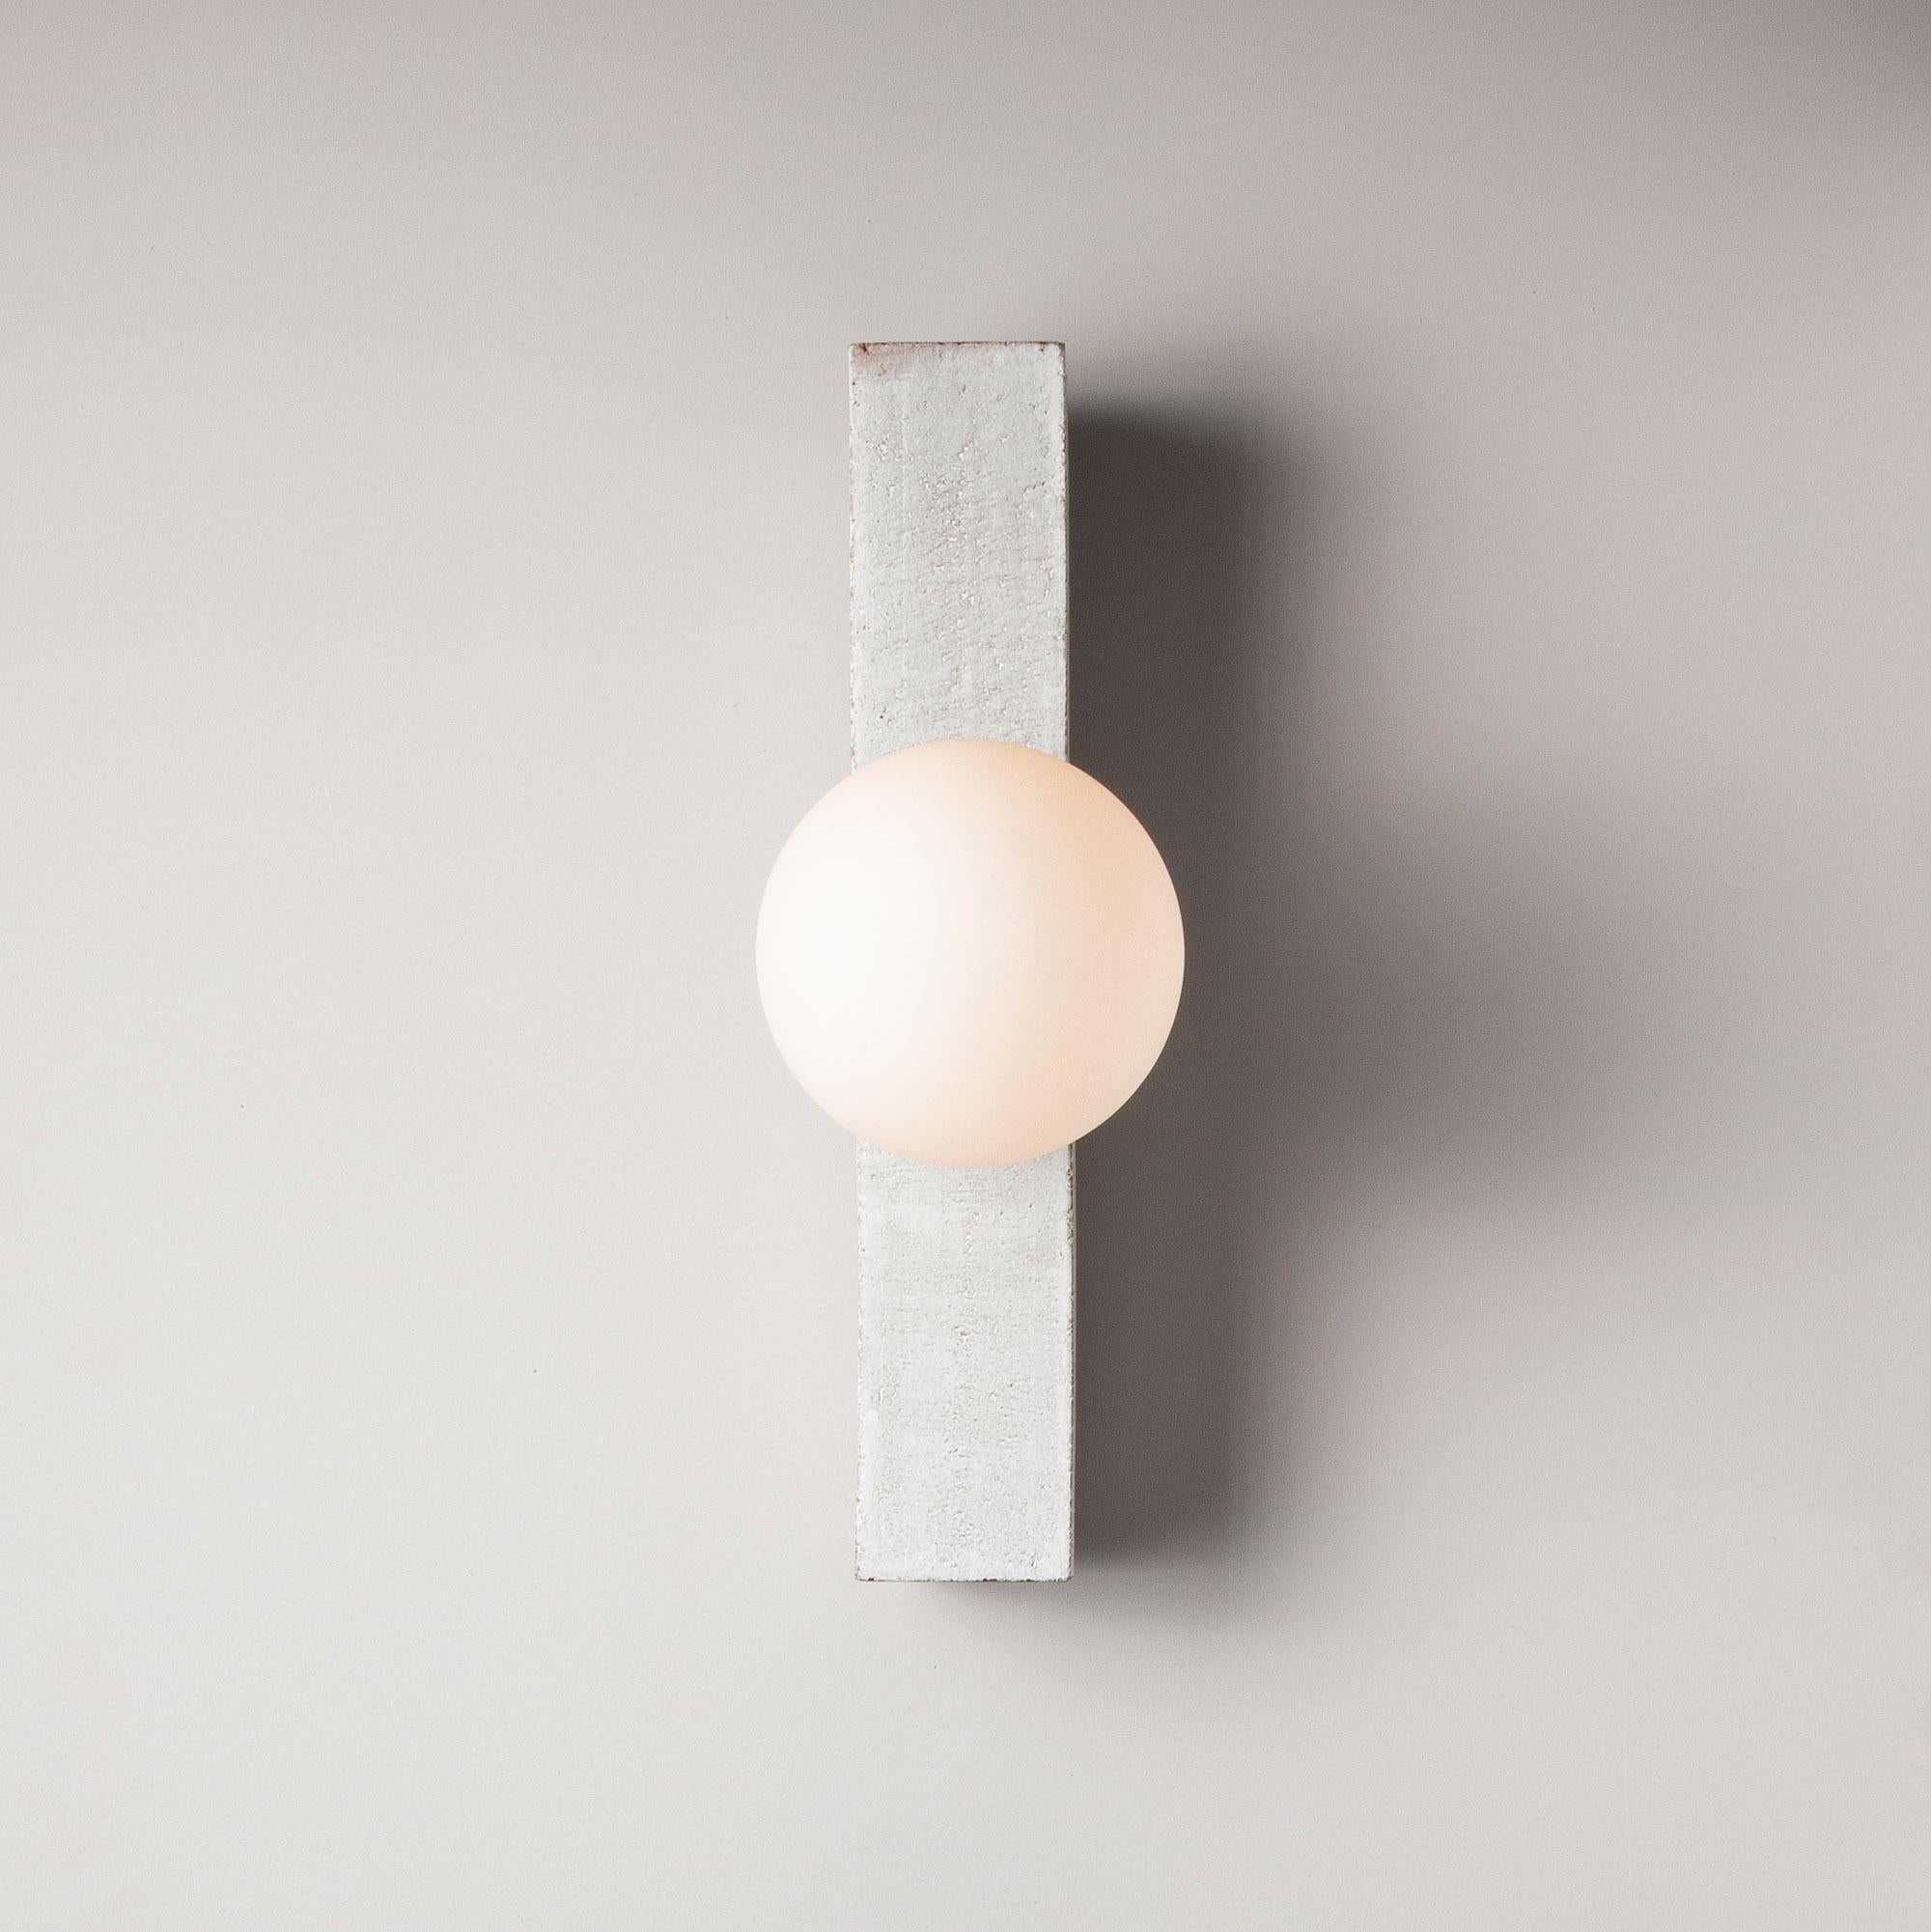 Inspired by midcentury Brutalist architecture and building materials, this minimal handmade sconce balances a strong substantial ceramic base with delicate brass hardware and matte white glass. The substantial ceramic center column is handcrafted